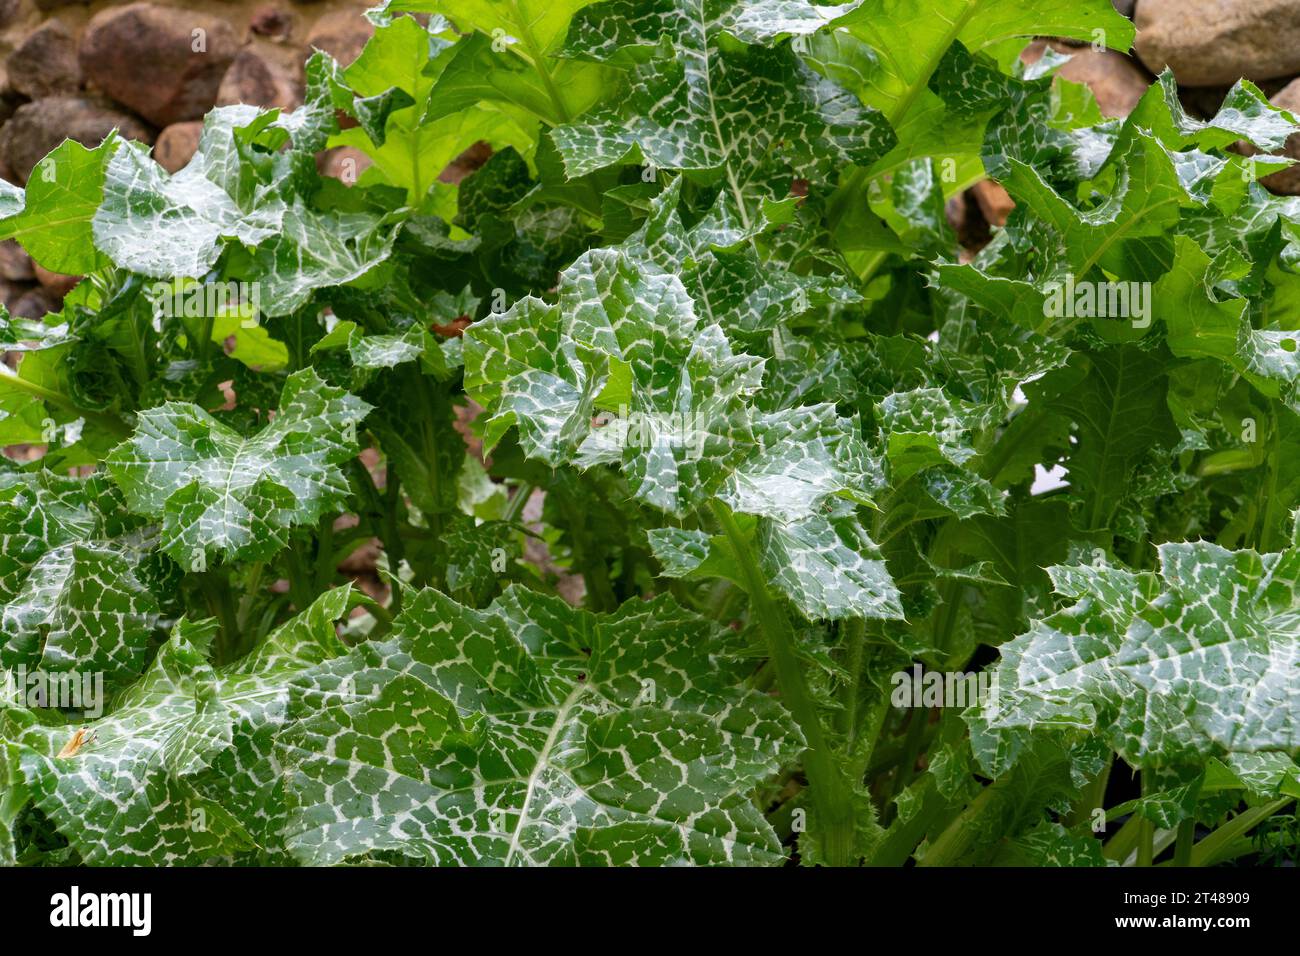 A milk thistle plant grows in a stone garden. Take in the intricate texture of its leaves, adorned with milky white veins, in a close-up. This plant h Stock Photo